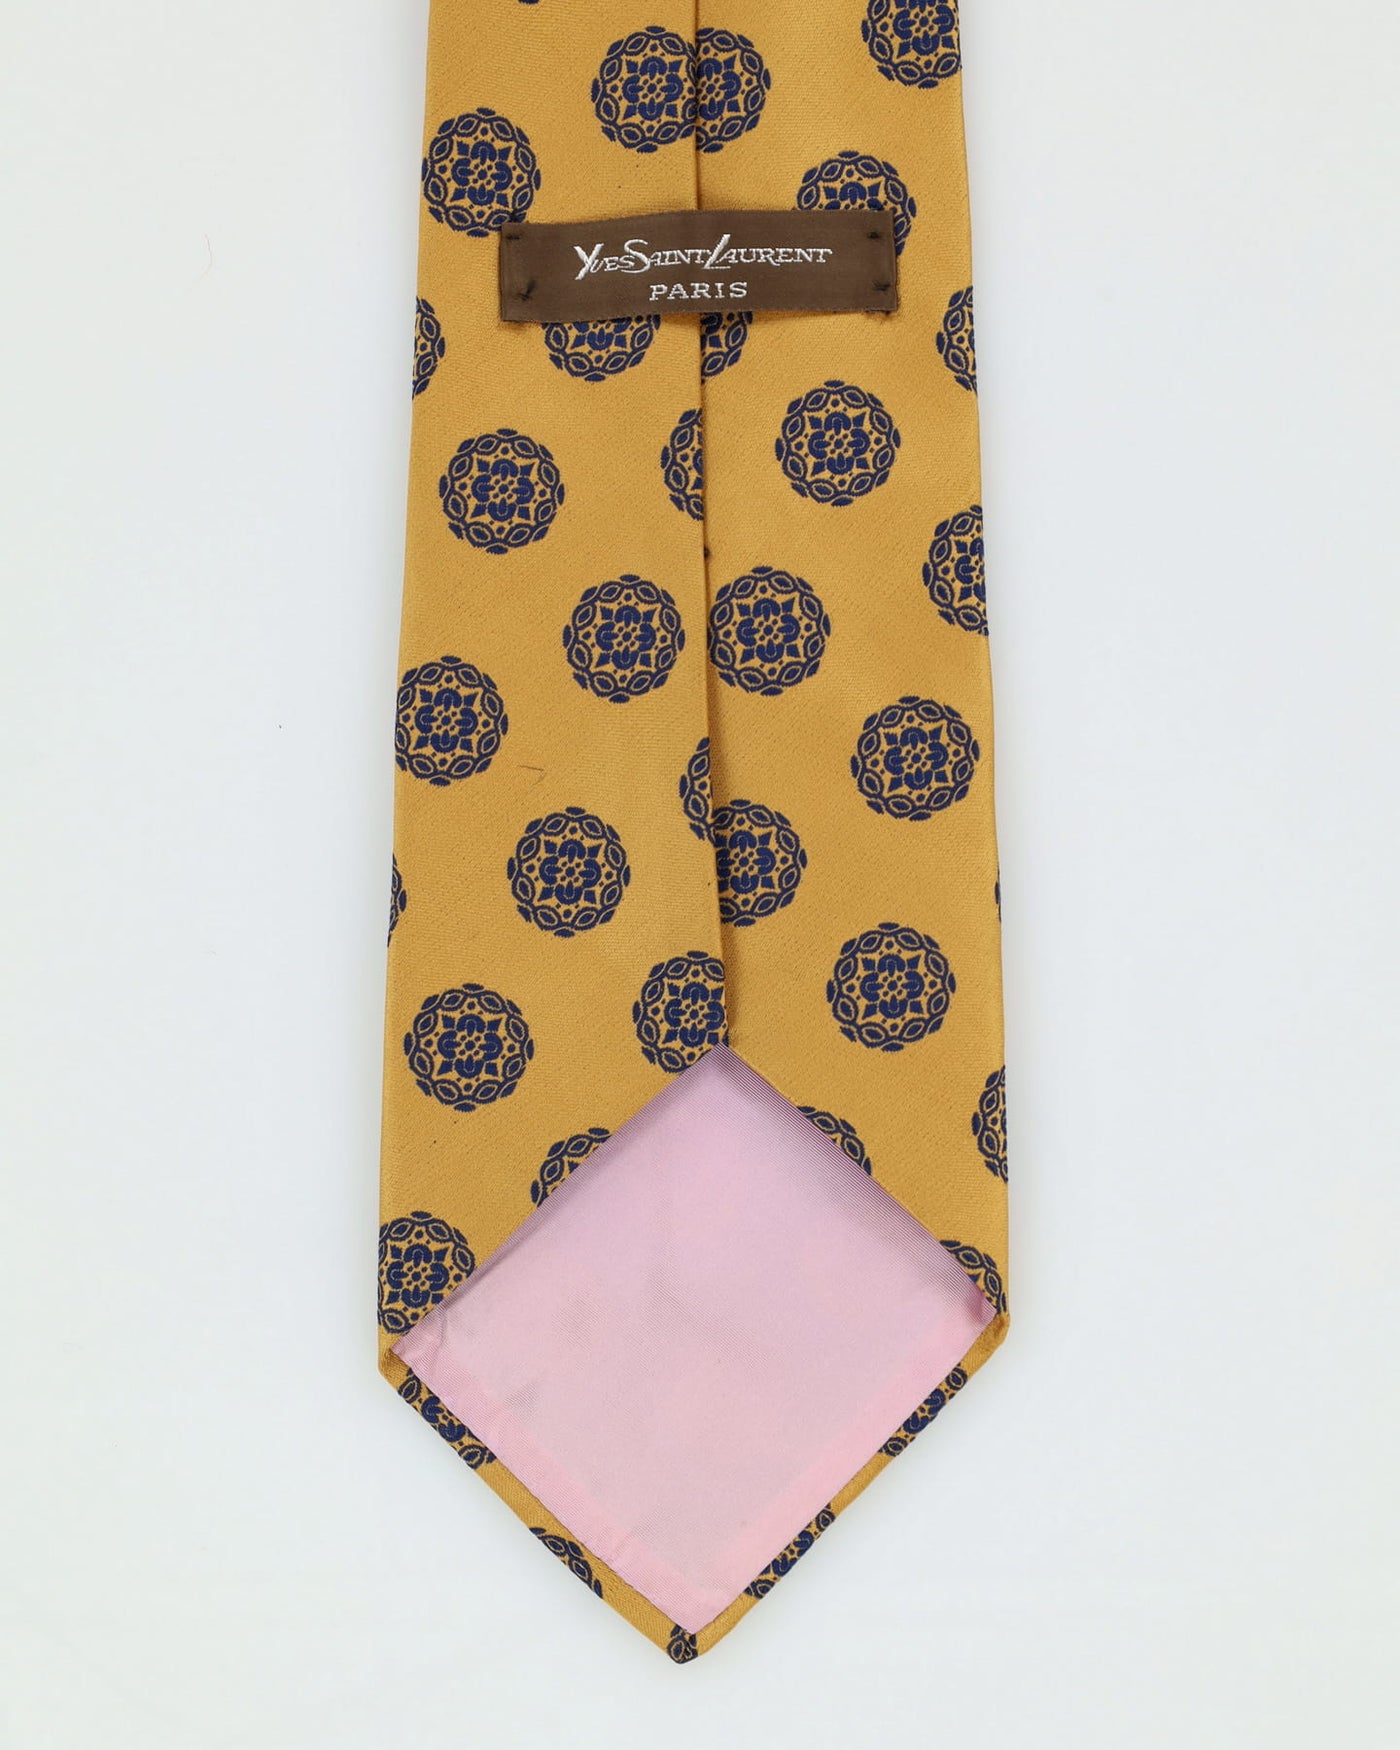 00s Yves Saint Laurent Yellow / Navy Patterned Tie